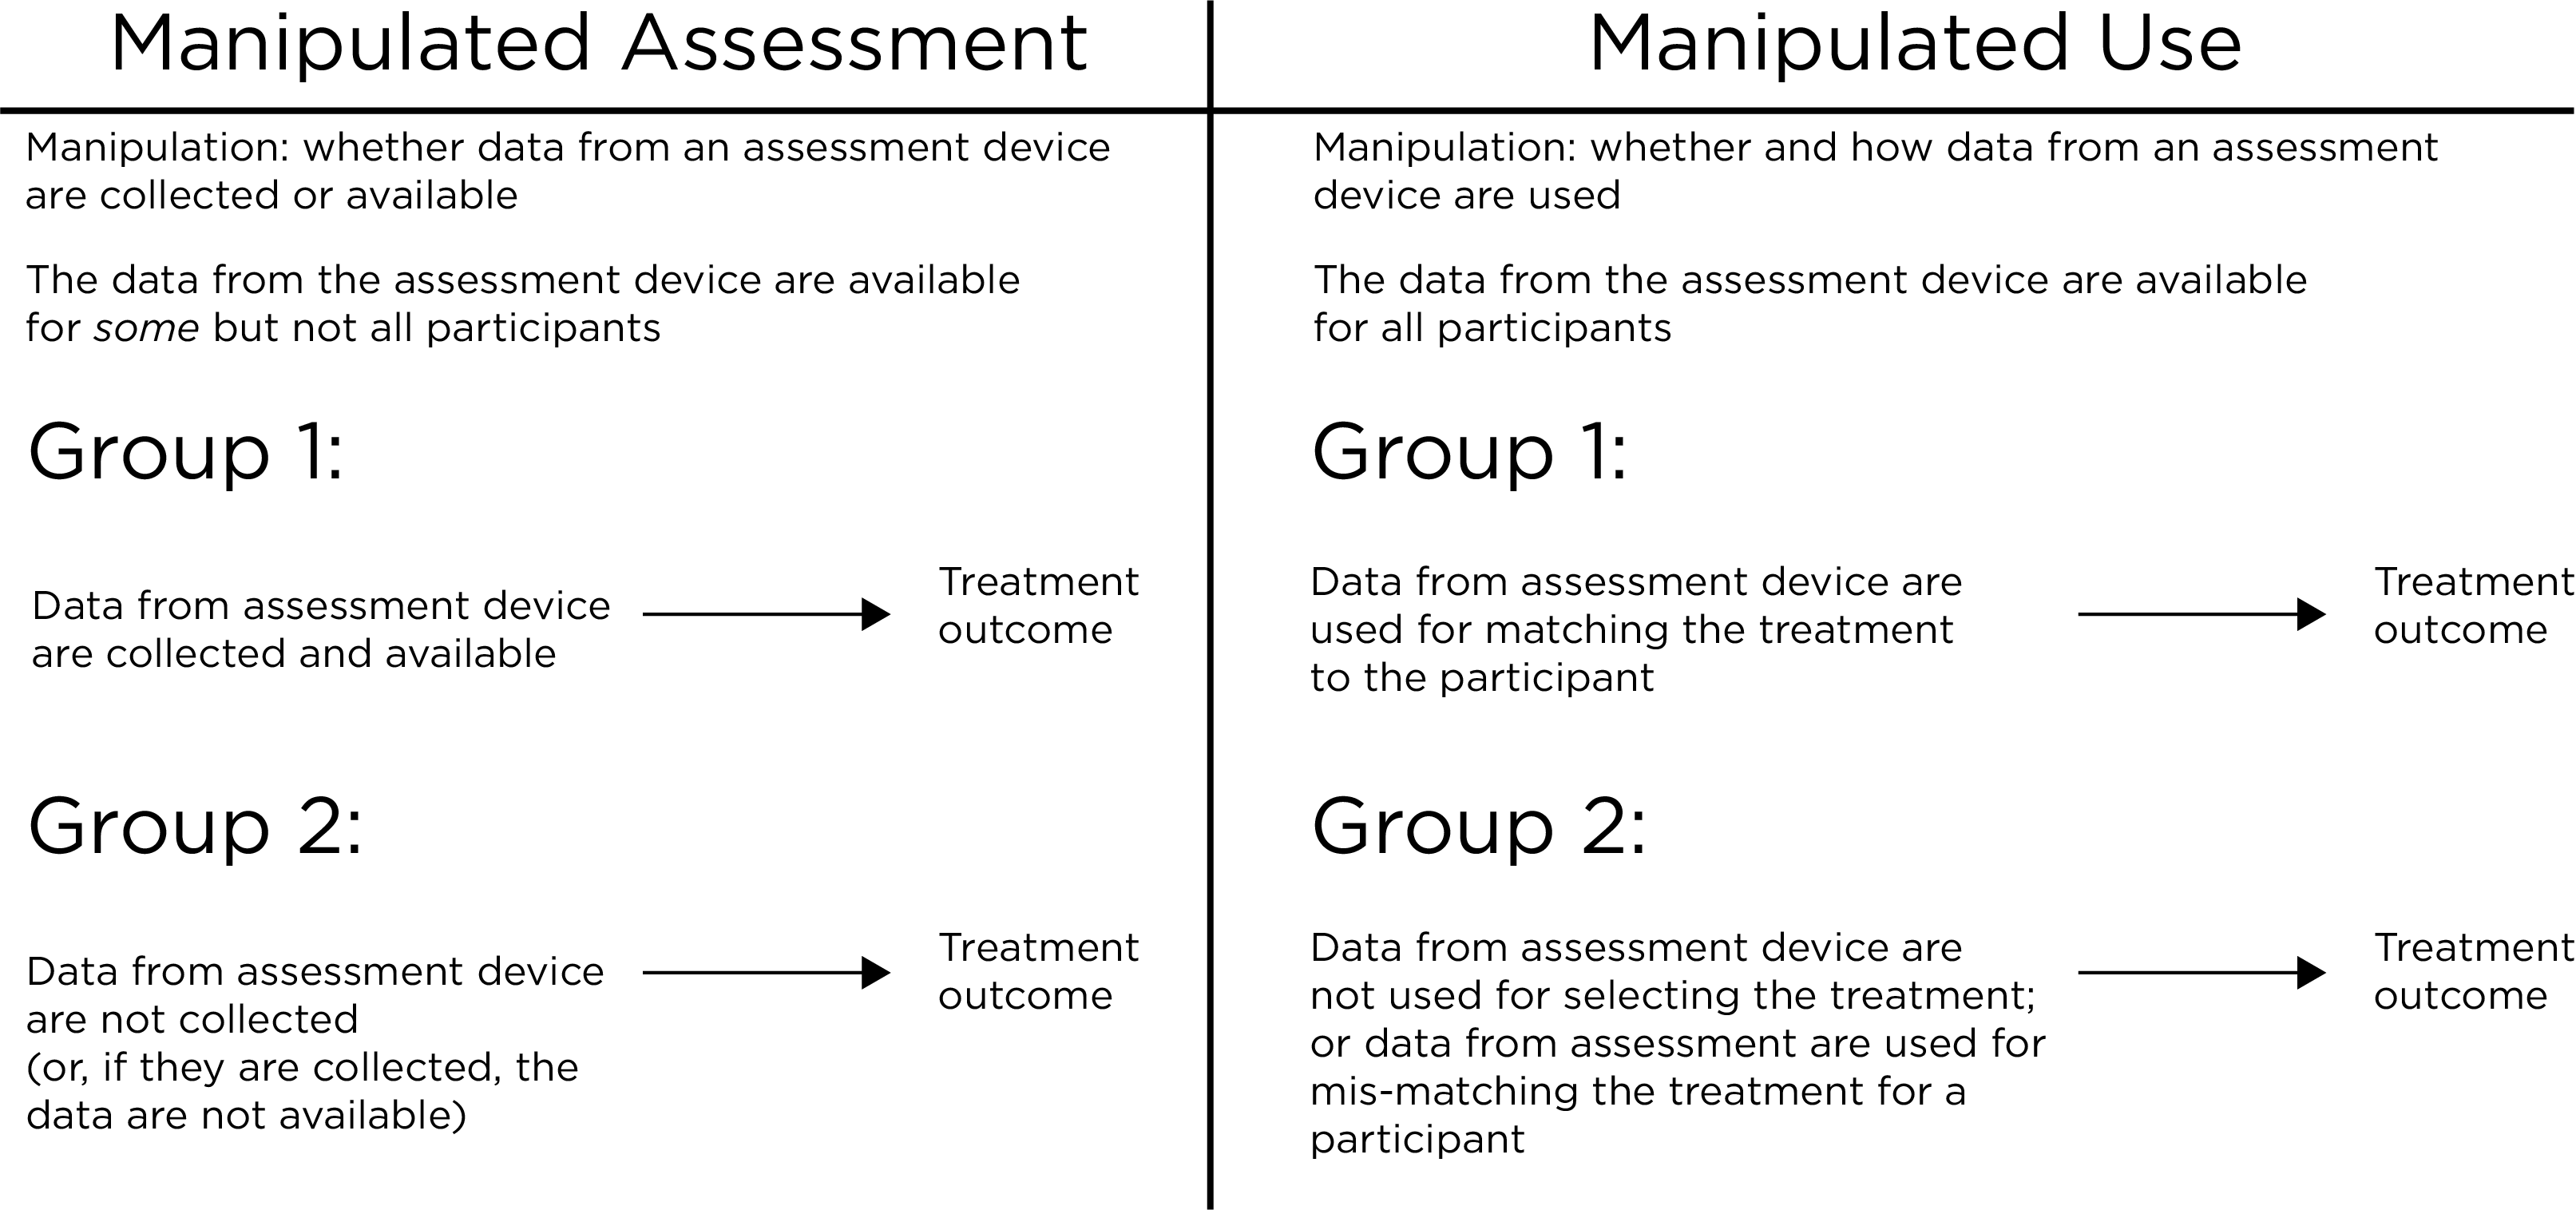 Research Designs That Evaluate the Treatment Utility of Assessment.